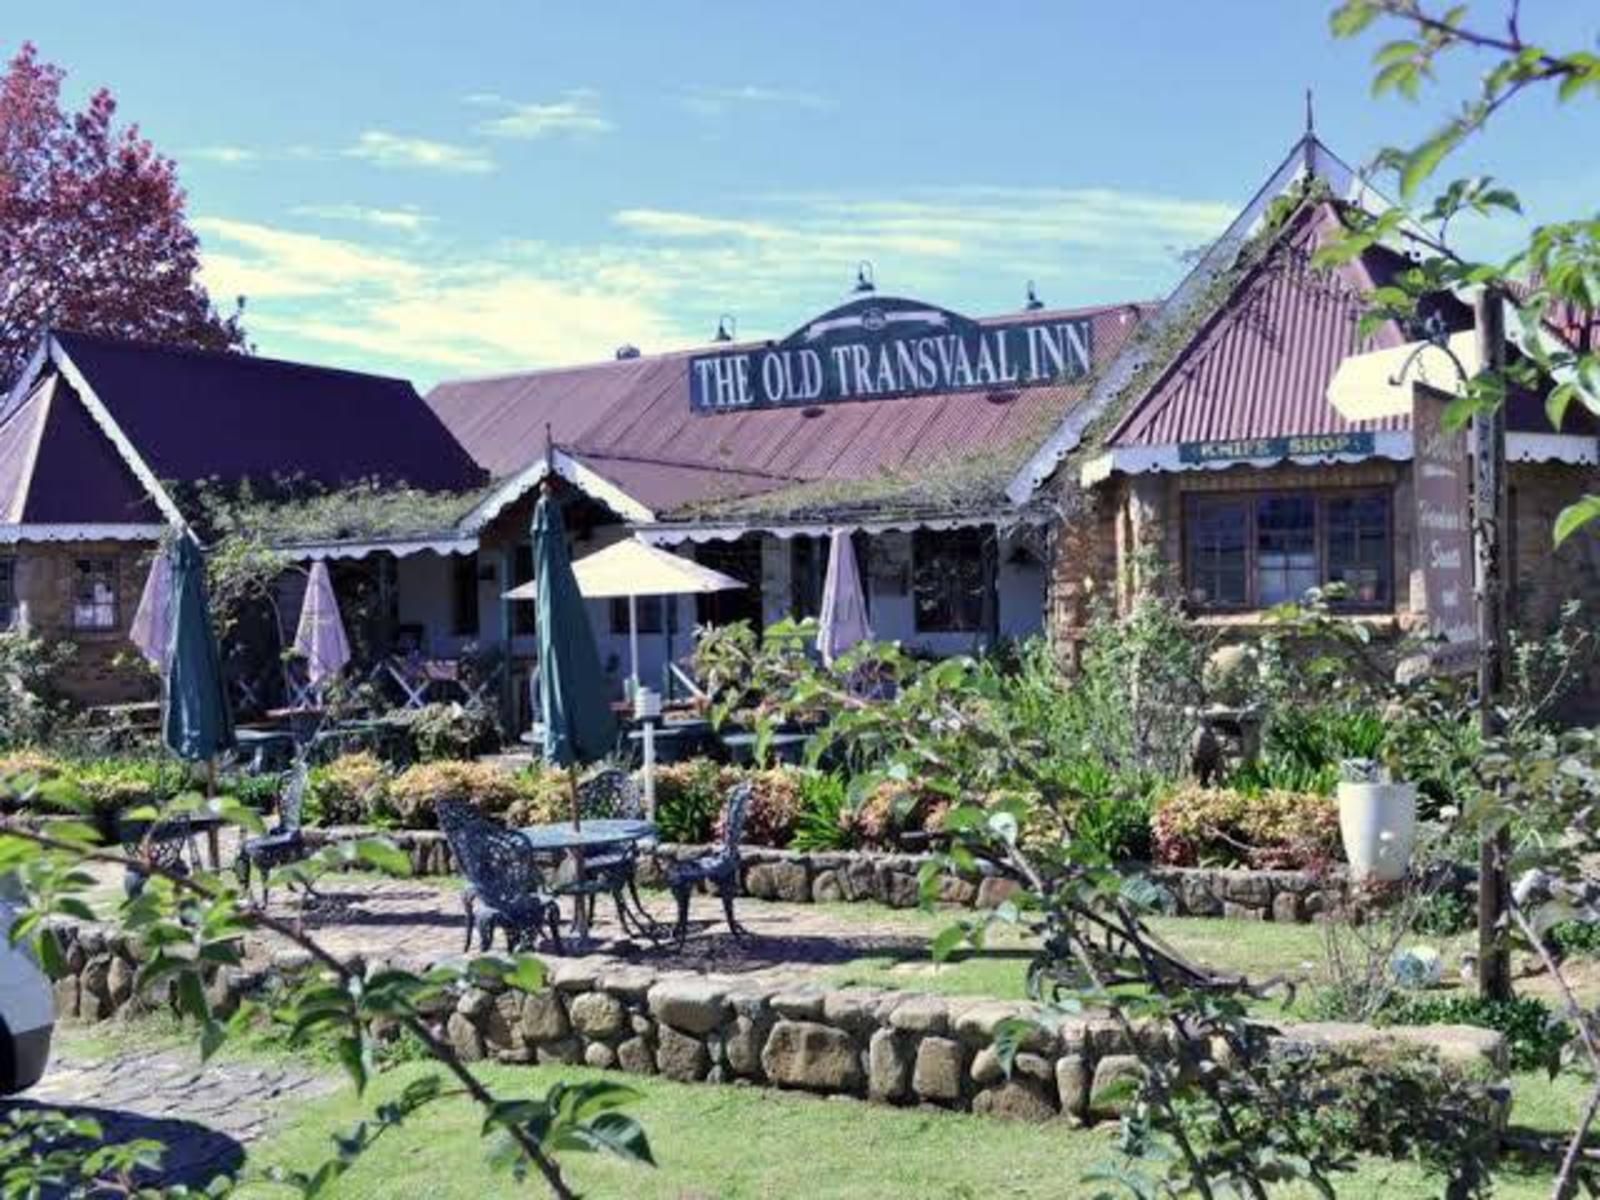 Old Transvaal Inn Accommodation Dullstroom Mpumalanga South Africa Building, Architecture, Bar